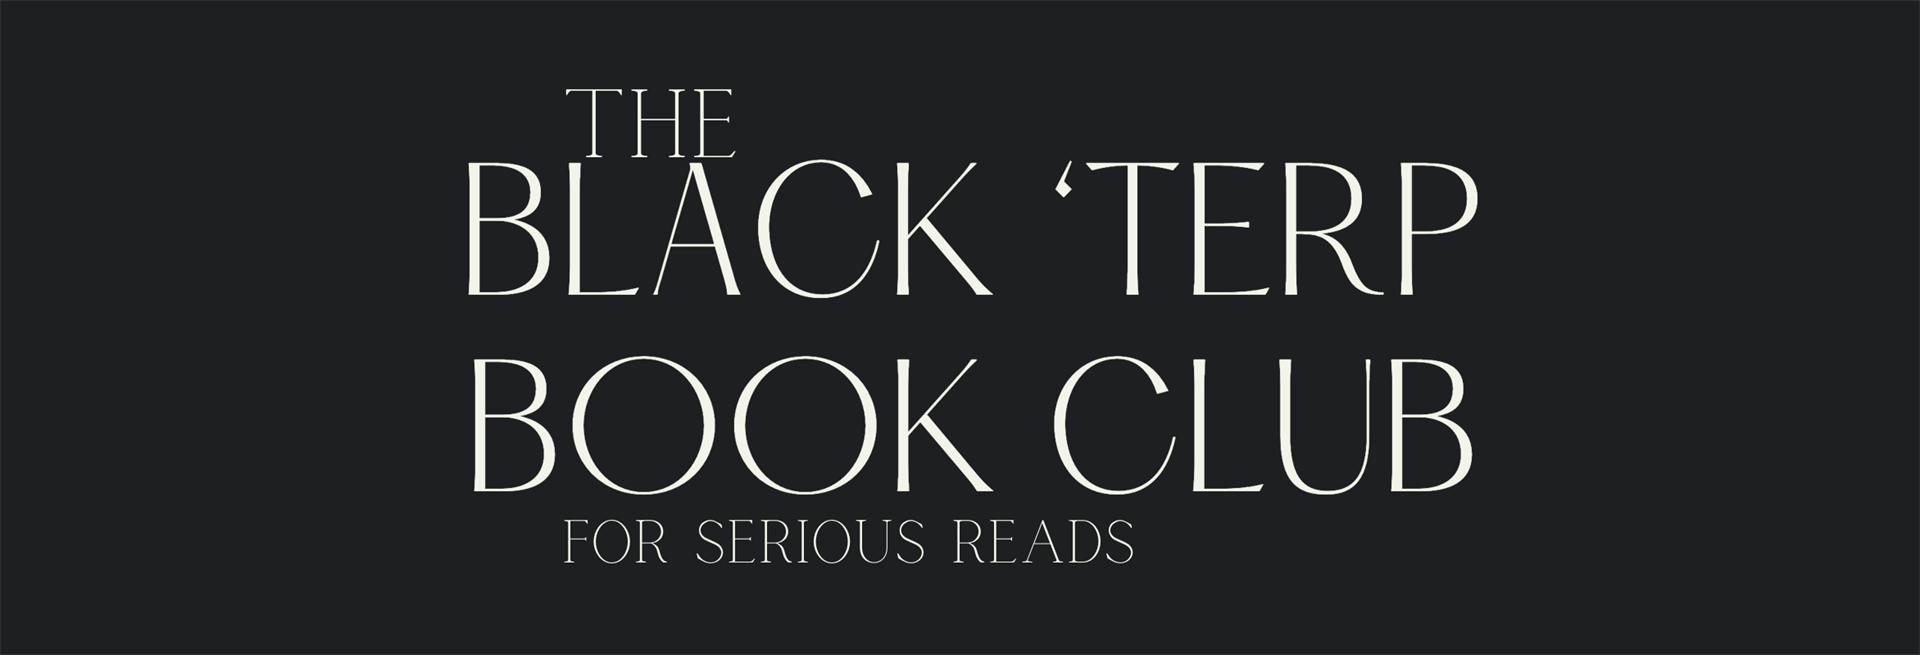 "The Black 'Terp Book Club for Serious Reads"